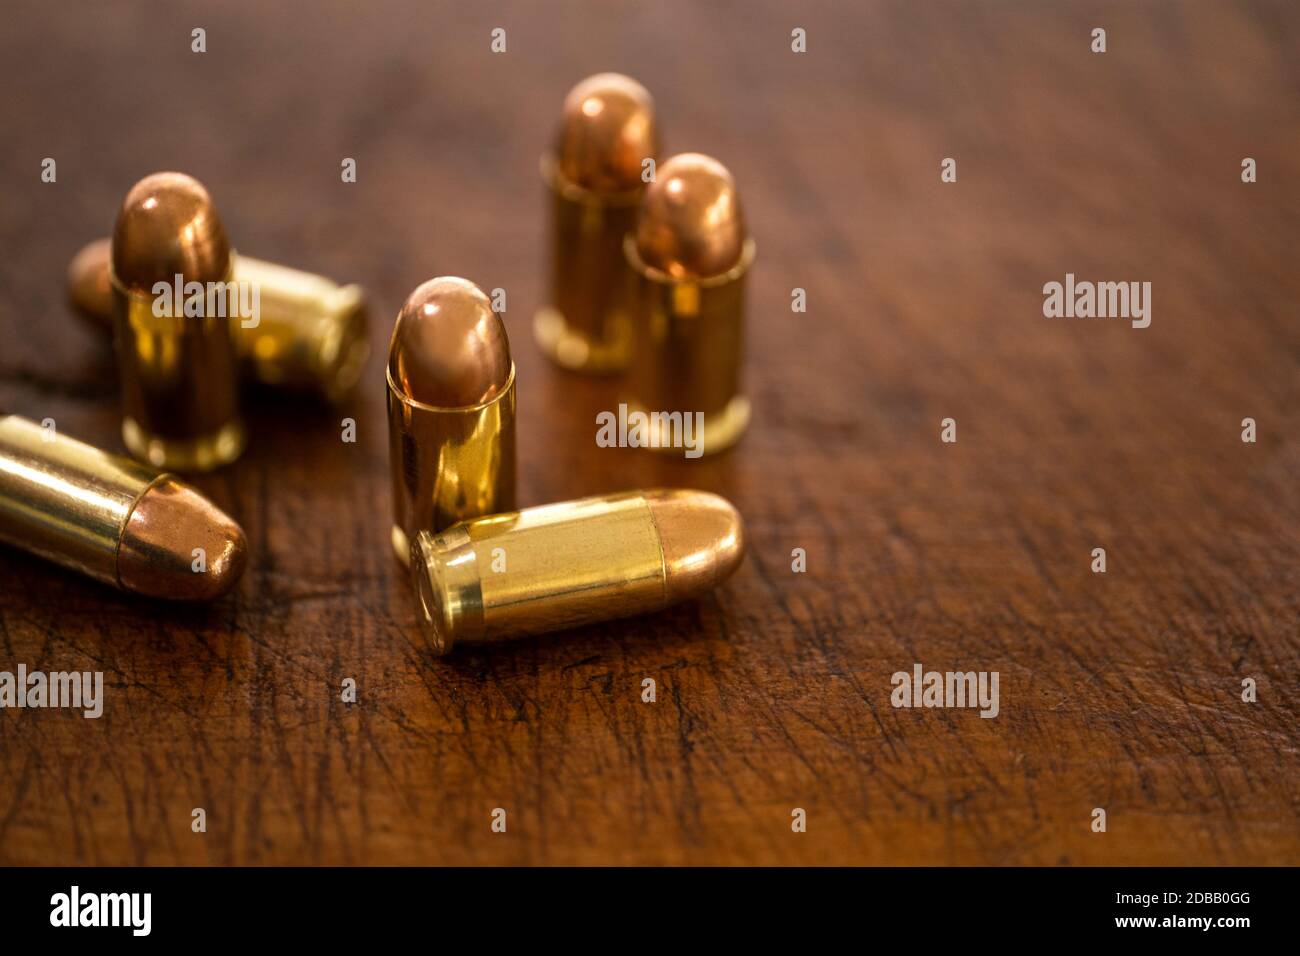 Gold bullets on wooden surface Stock Photo